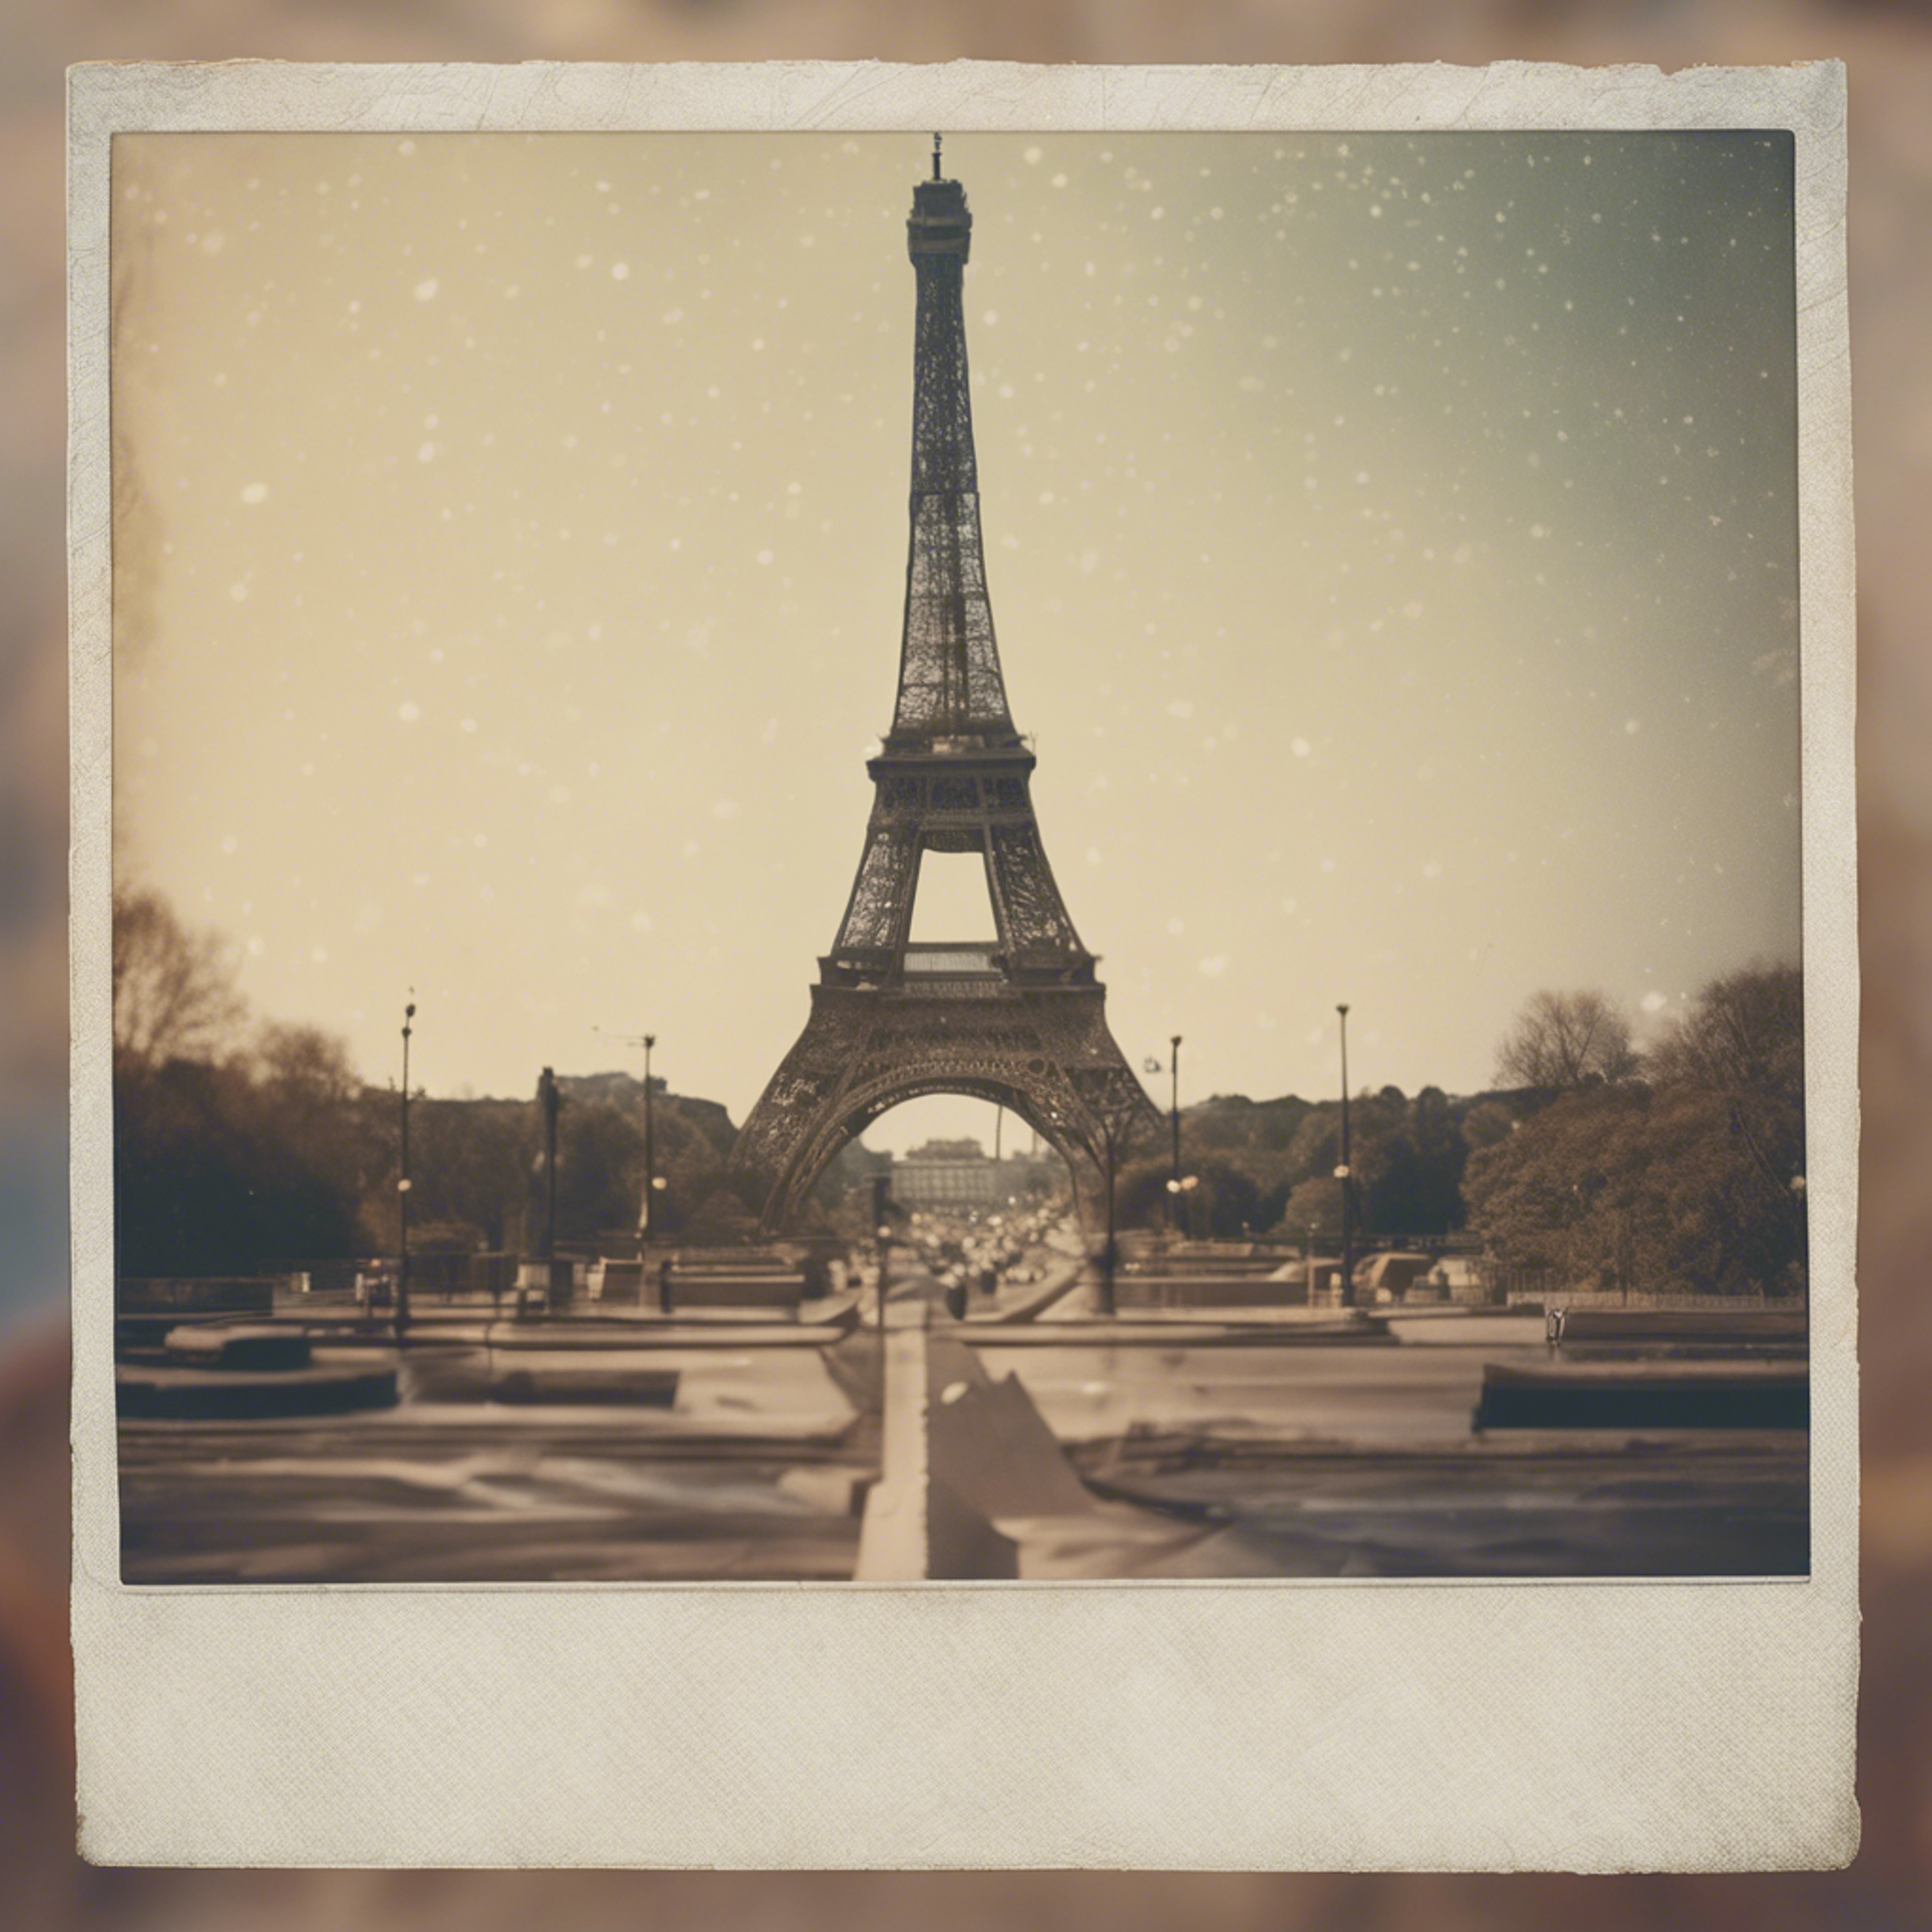 A faded beige Polaroid picture of an iconic landmark from the 70s. Tapeta na zeď[3ceb93f71d2c49b28cf4]